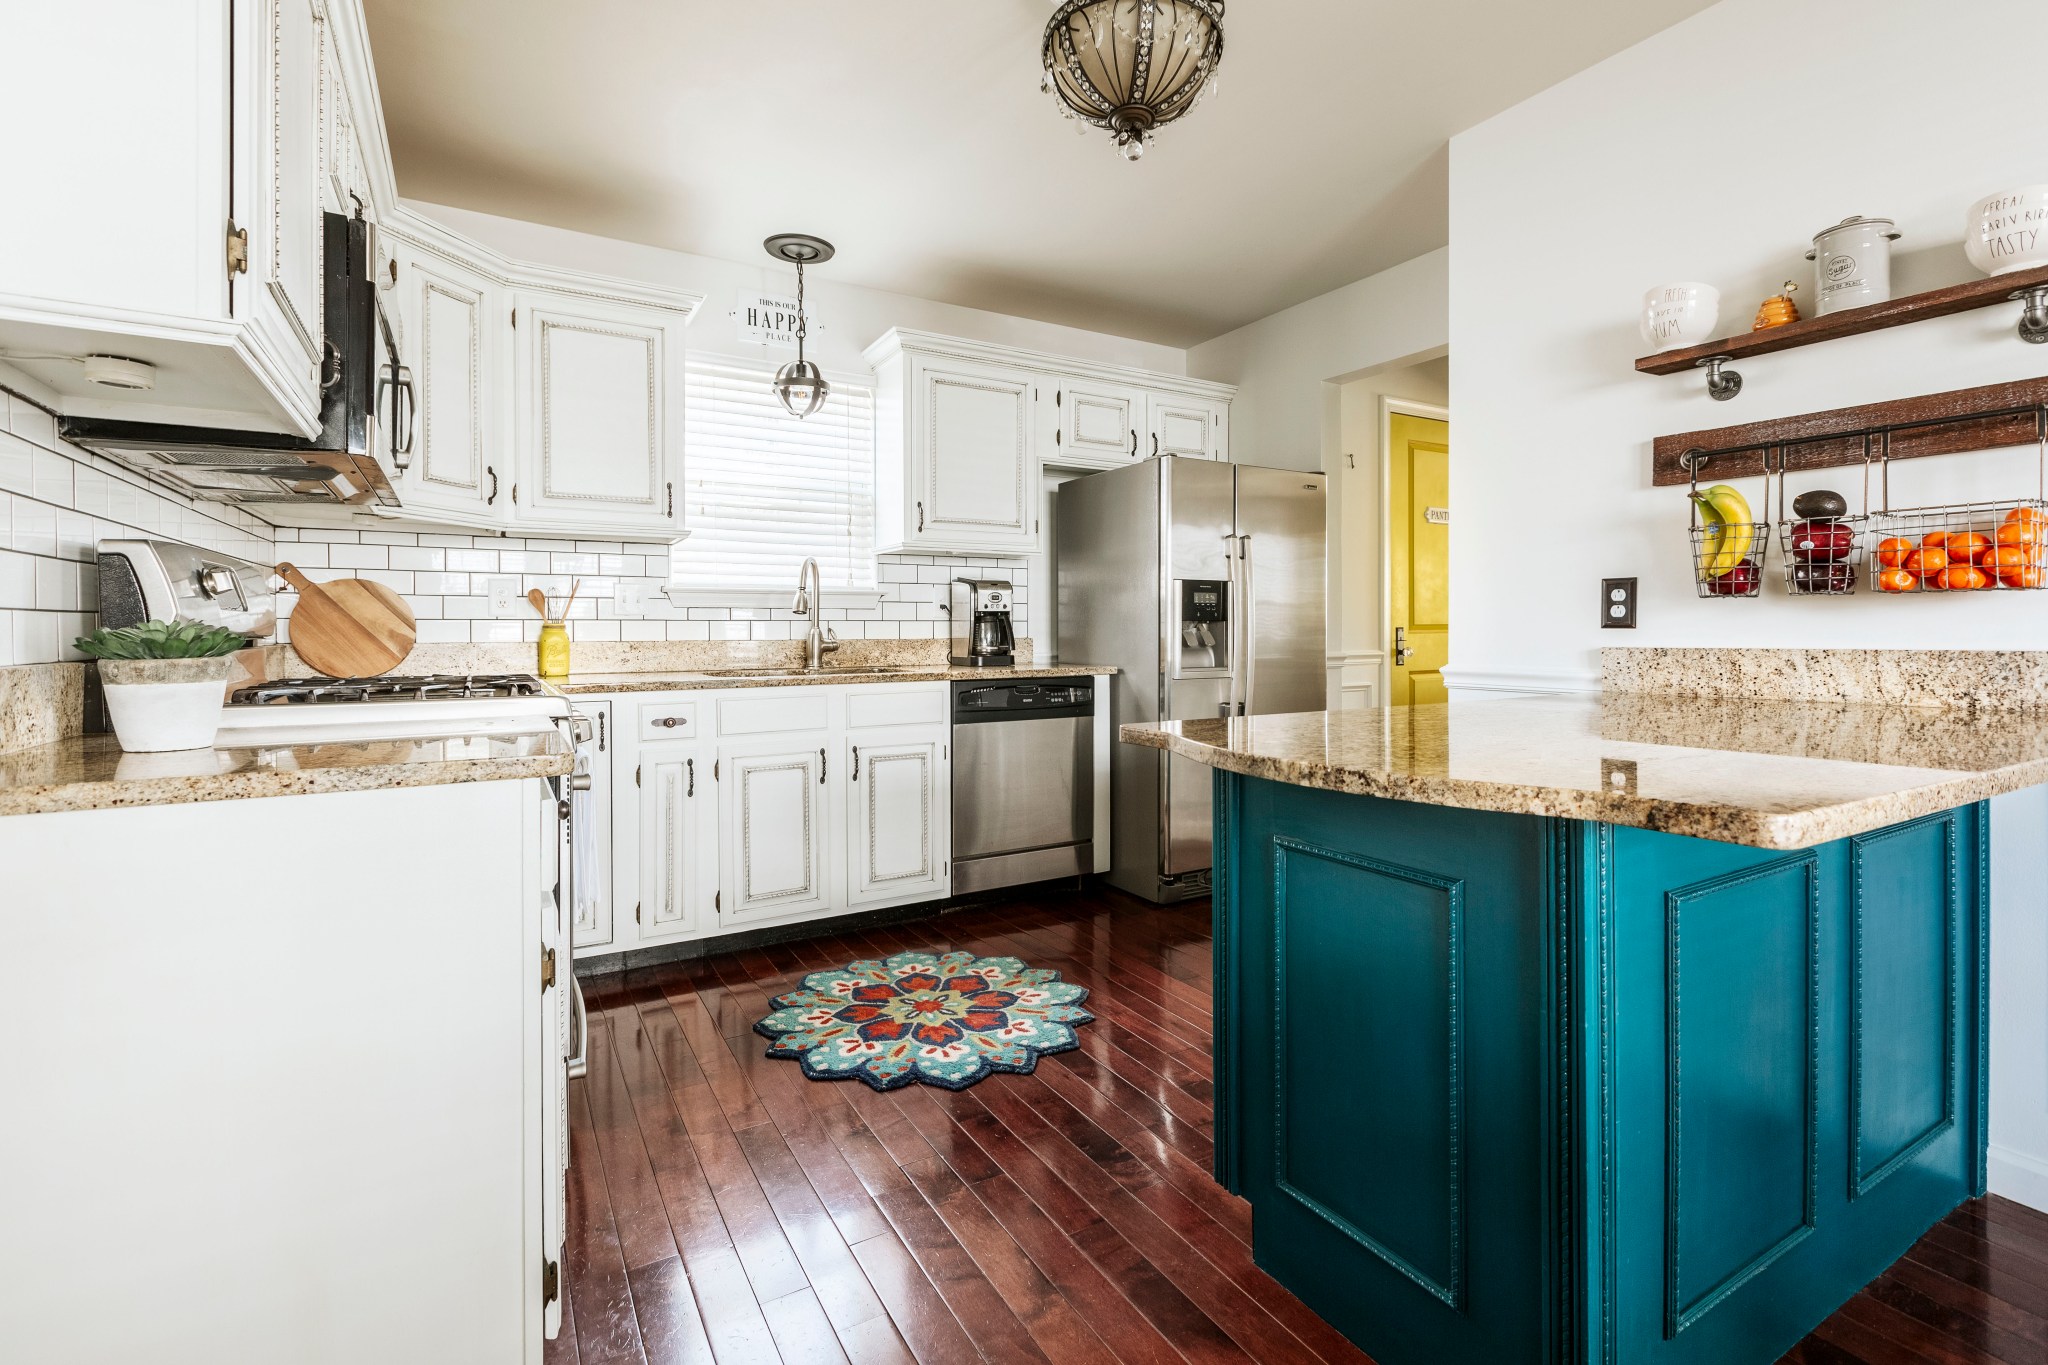 The Keys to Pulling Off a Colorful Kitchen - The Scout Guide